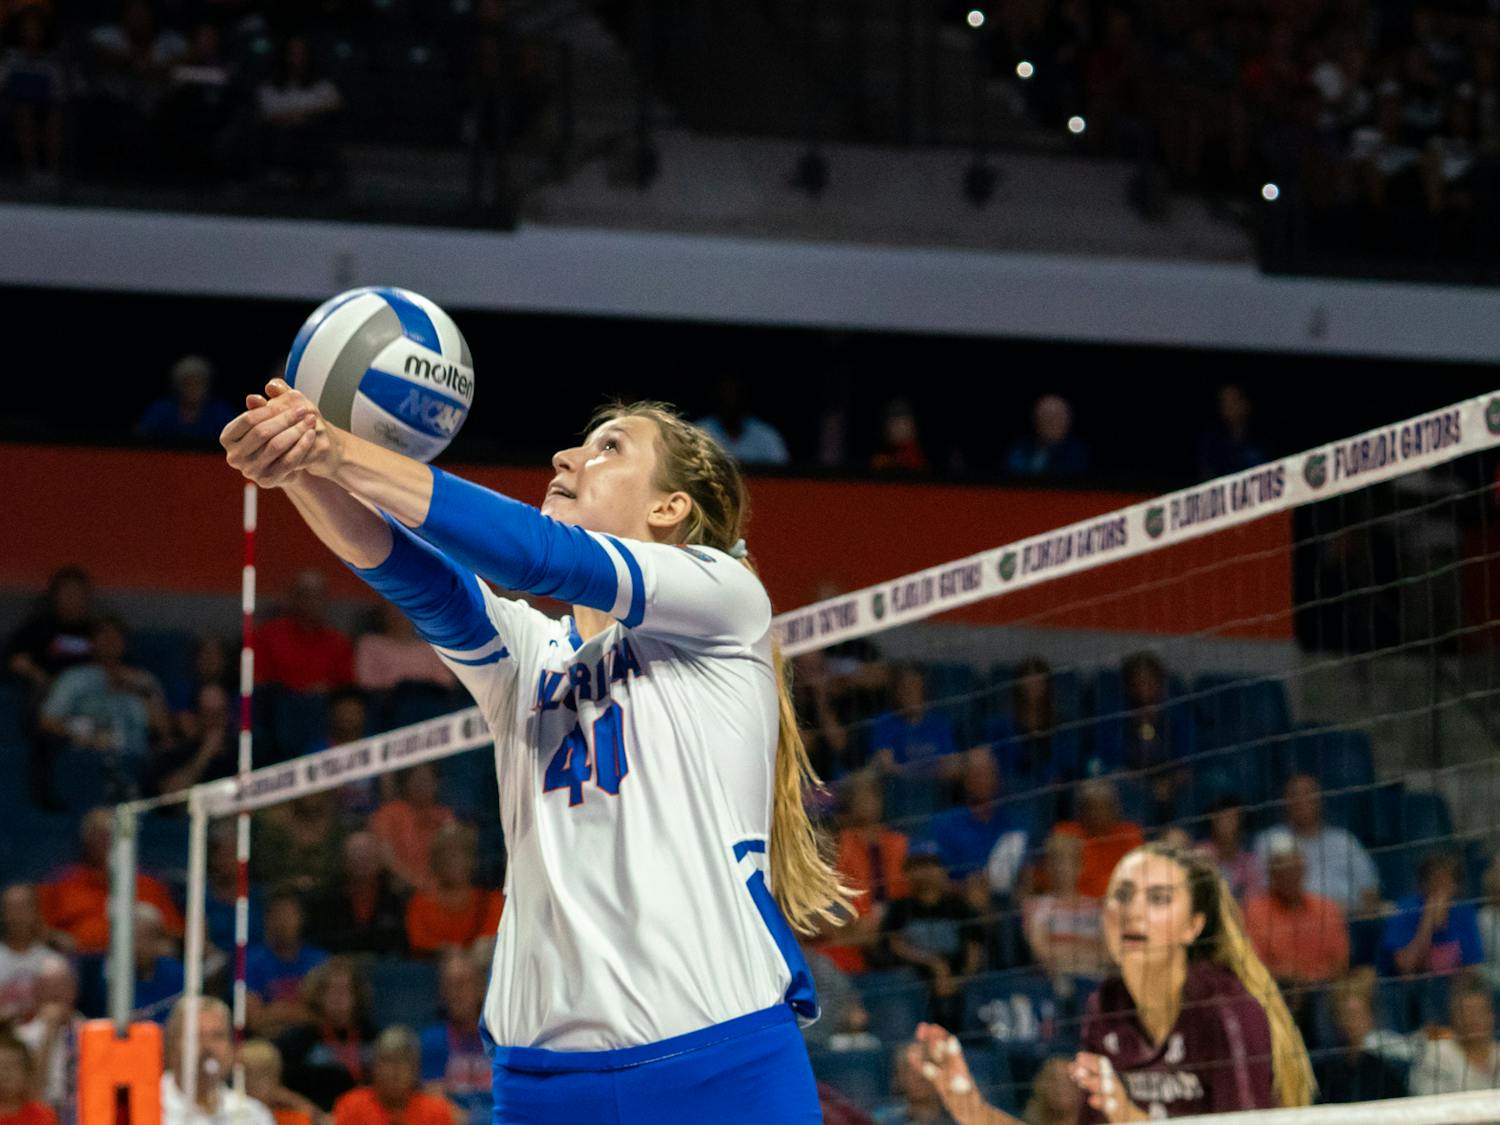 Attacker Holly Carlton recorded nine kills and a service ace on 26 attacks in Florida’s five-set loss to Missouri on Sunday afternoon. The loss snaps a 14-match winning streak stretching back to Sept. 7.